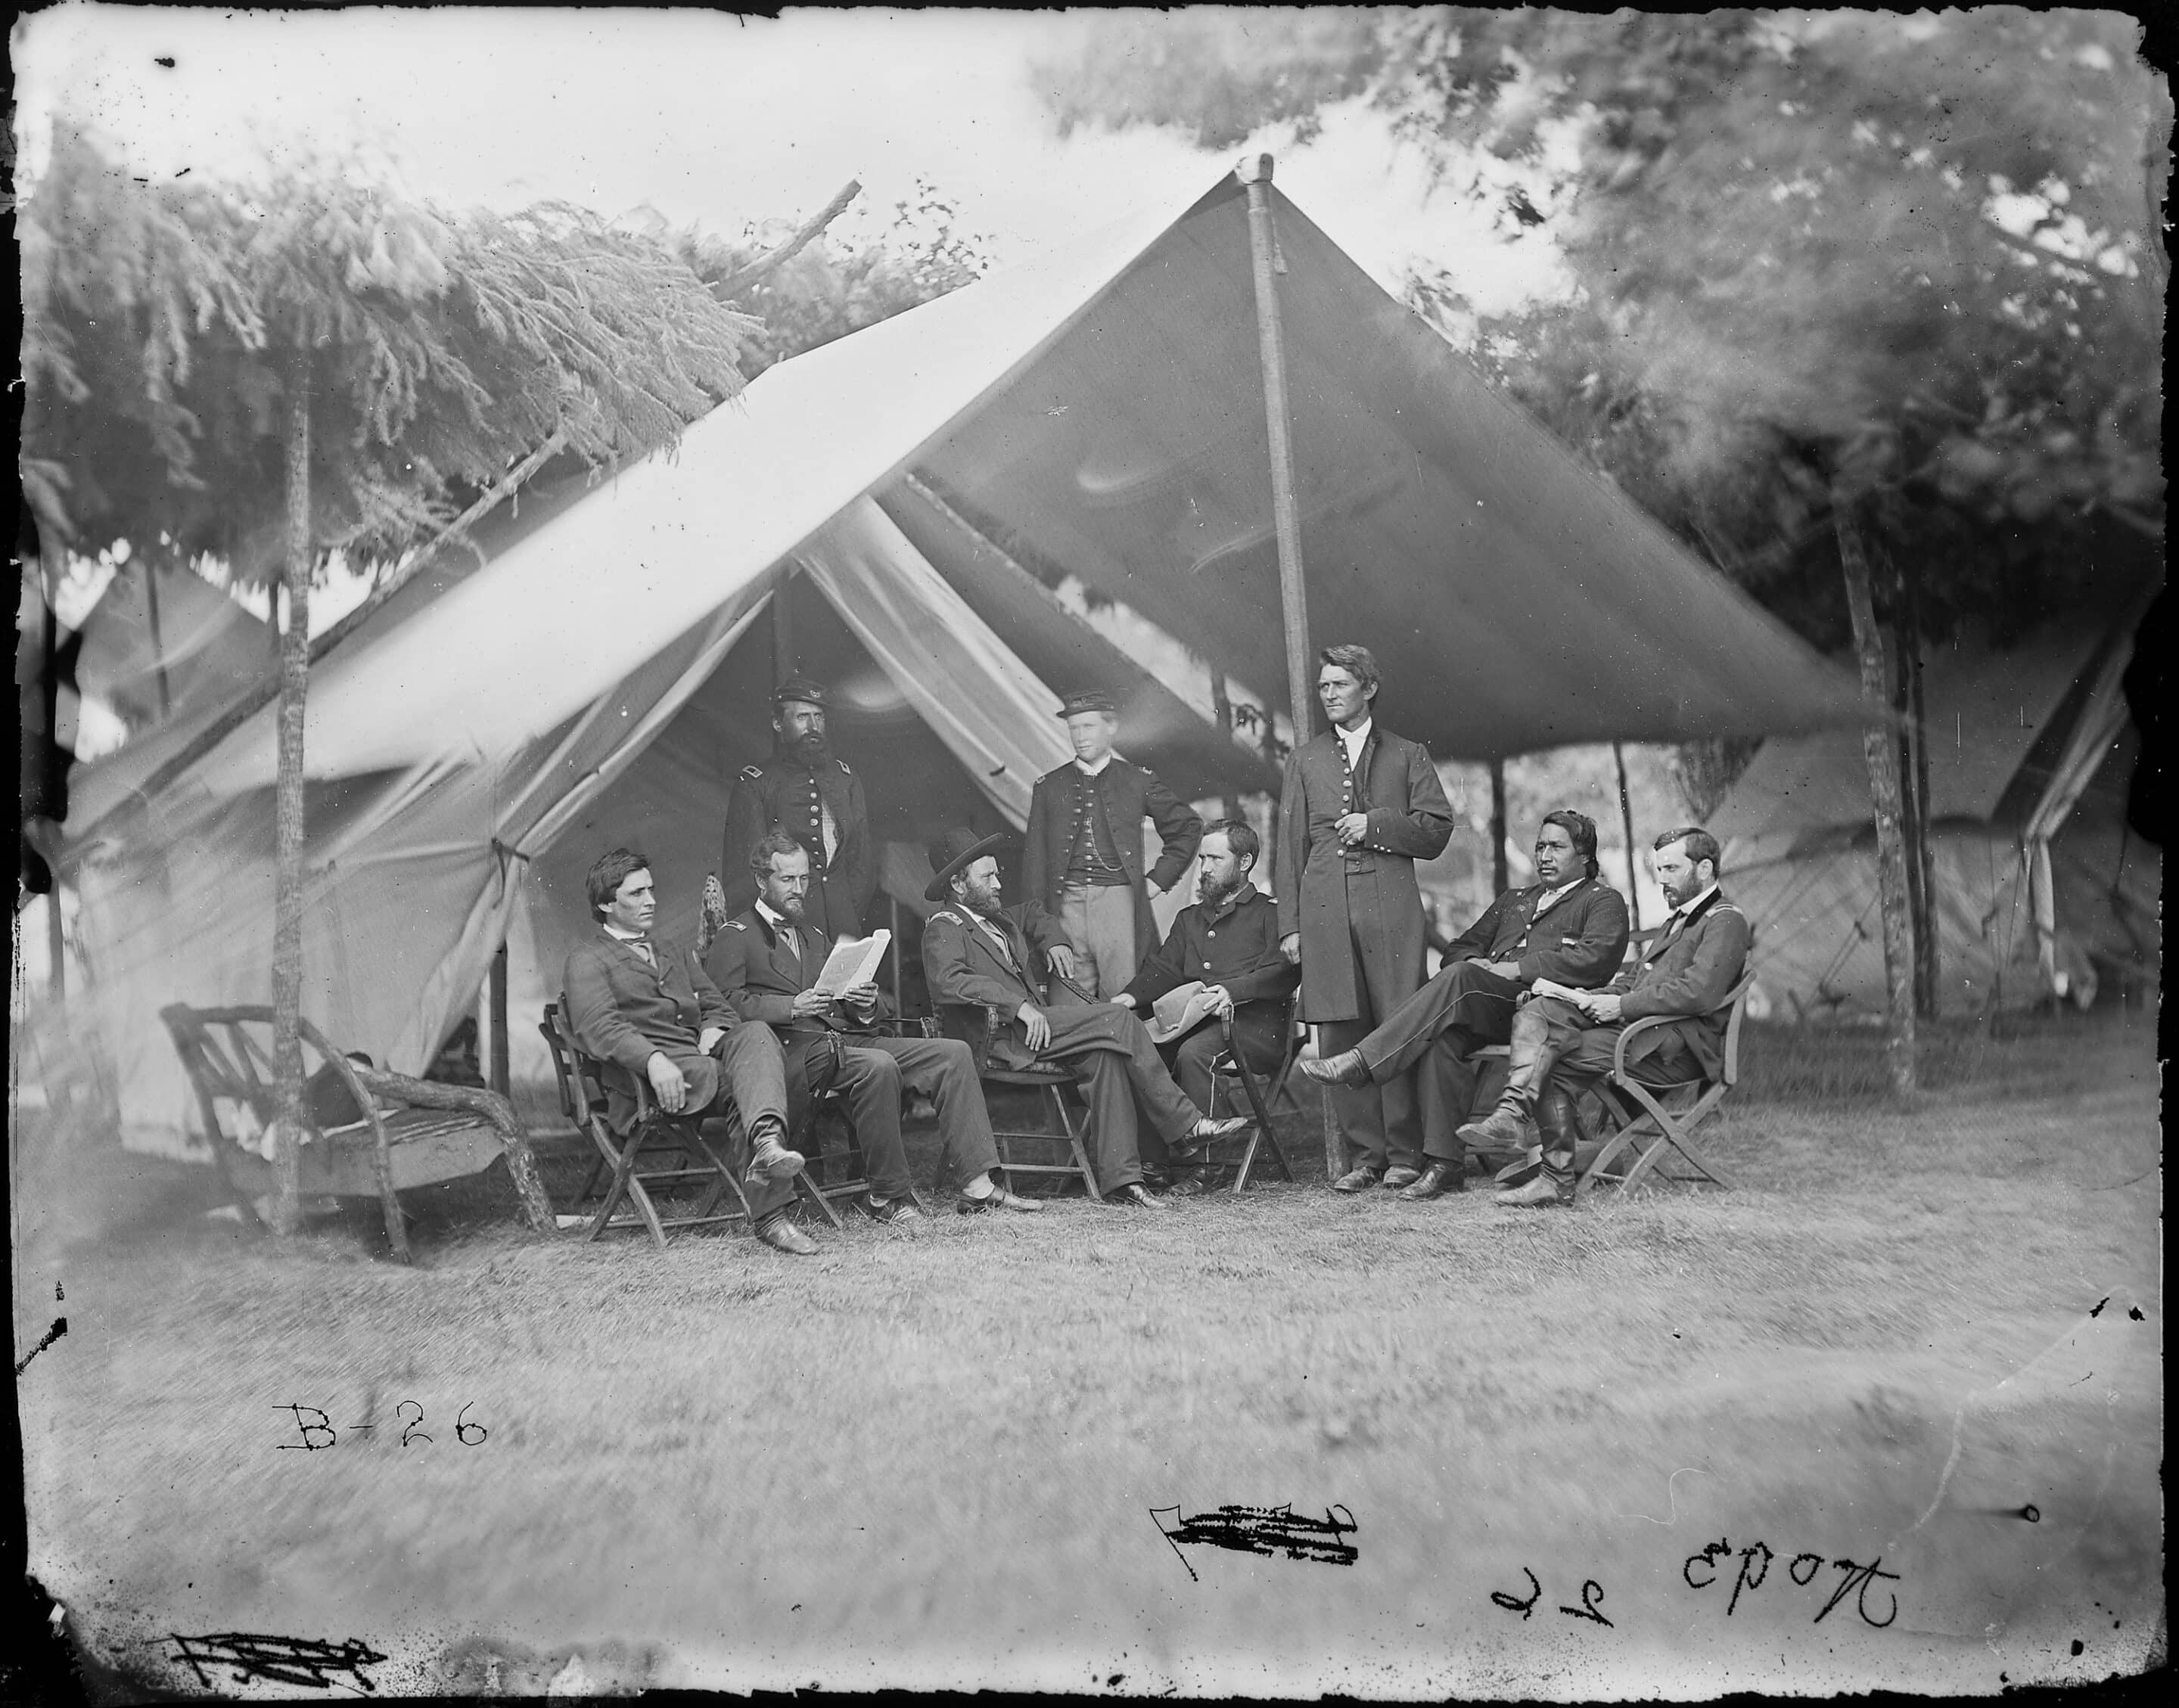 General Ulysses S. Grant (fourth from left) and his staff, including Lieutenant Colonel Ely S. Parker (Seneca, 1828–1895, second from the right), late spring, 1864. Photo by Mathew Brady. National Archives and Records Administration 524444